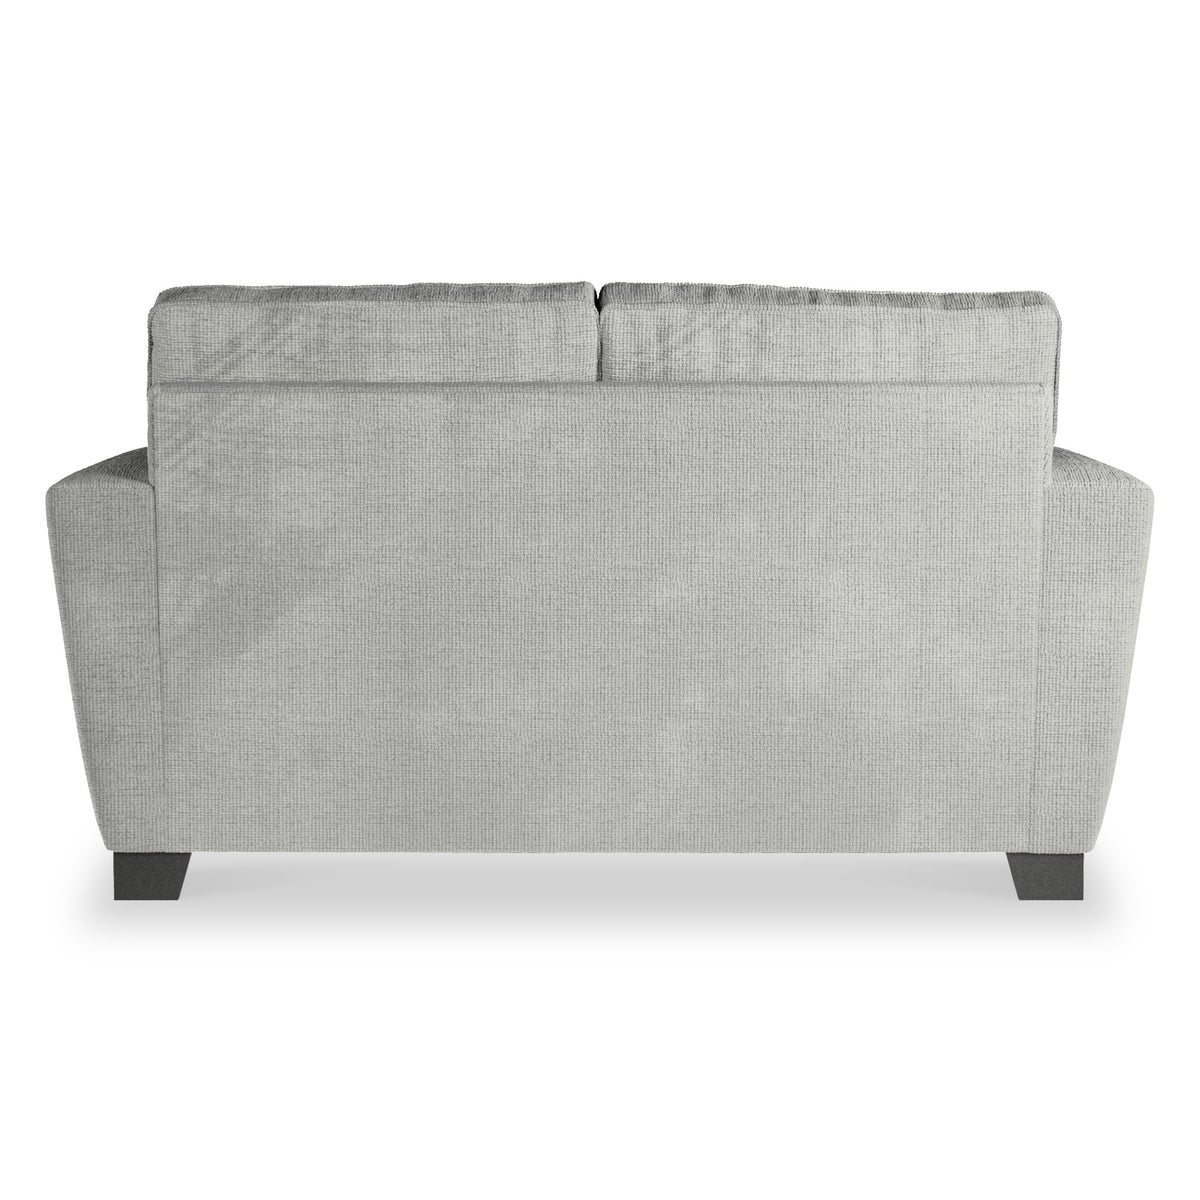 Chester Silver Hopsack 2 Seater Sofa